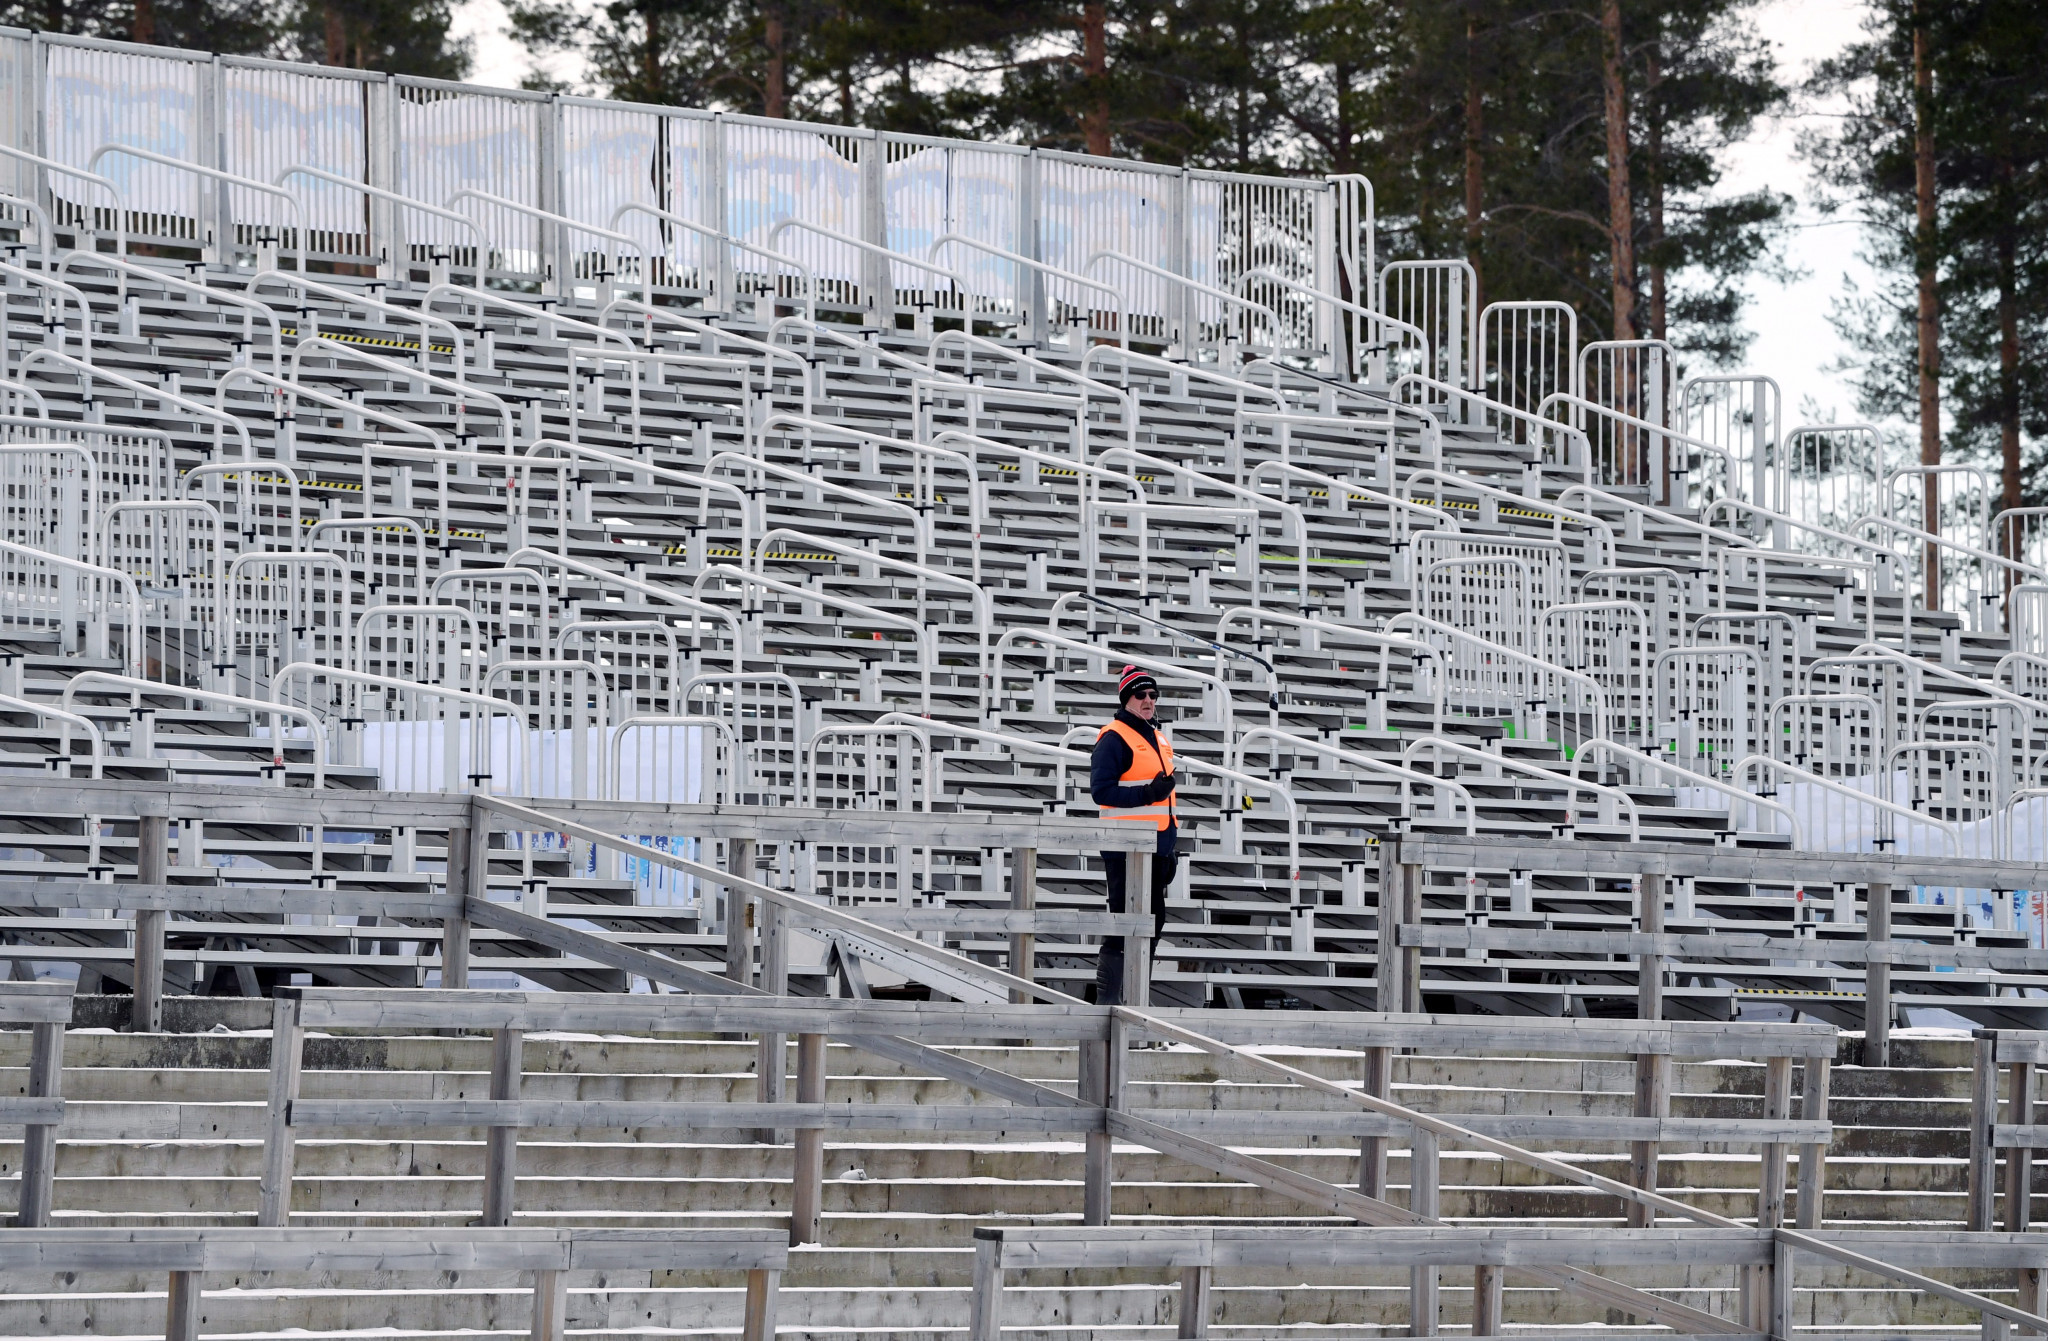 A restricted number of fans could attend the World Cups in Kontiolahti ©Getty Images